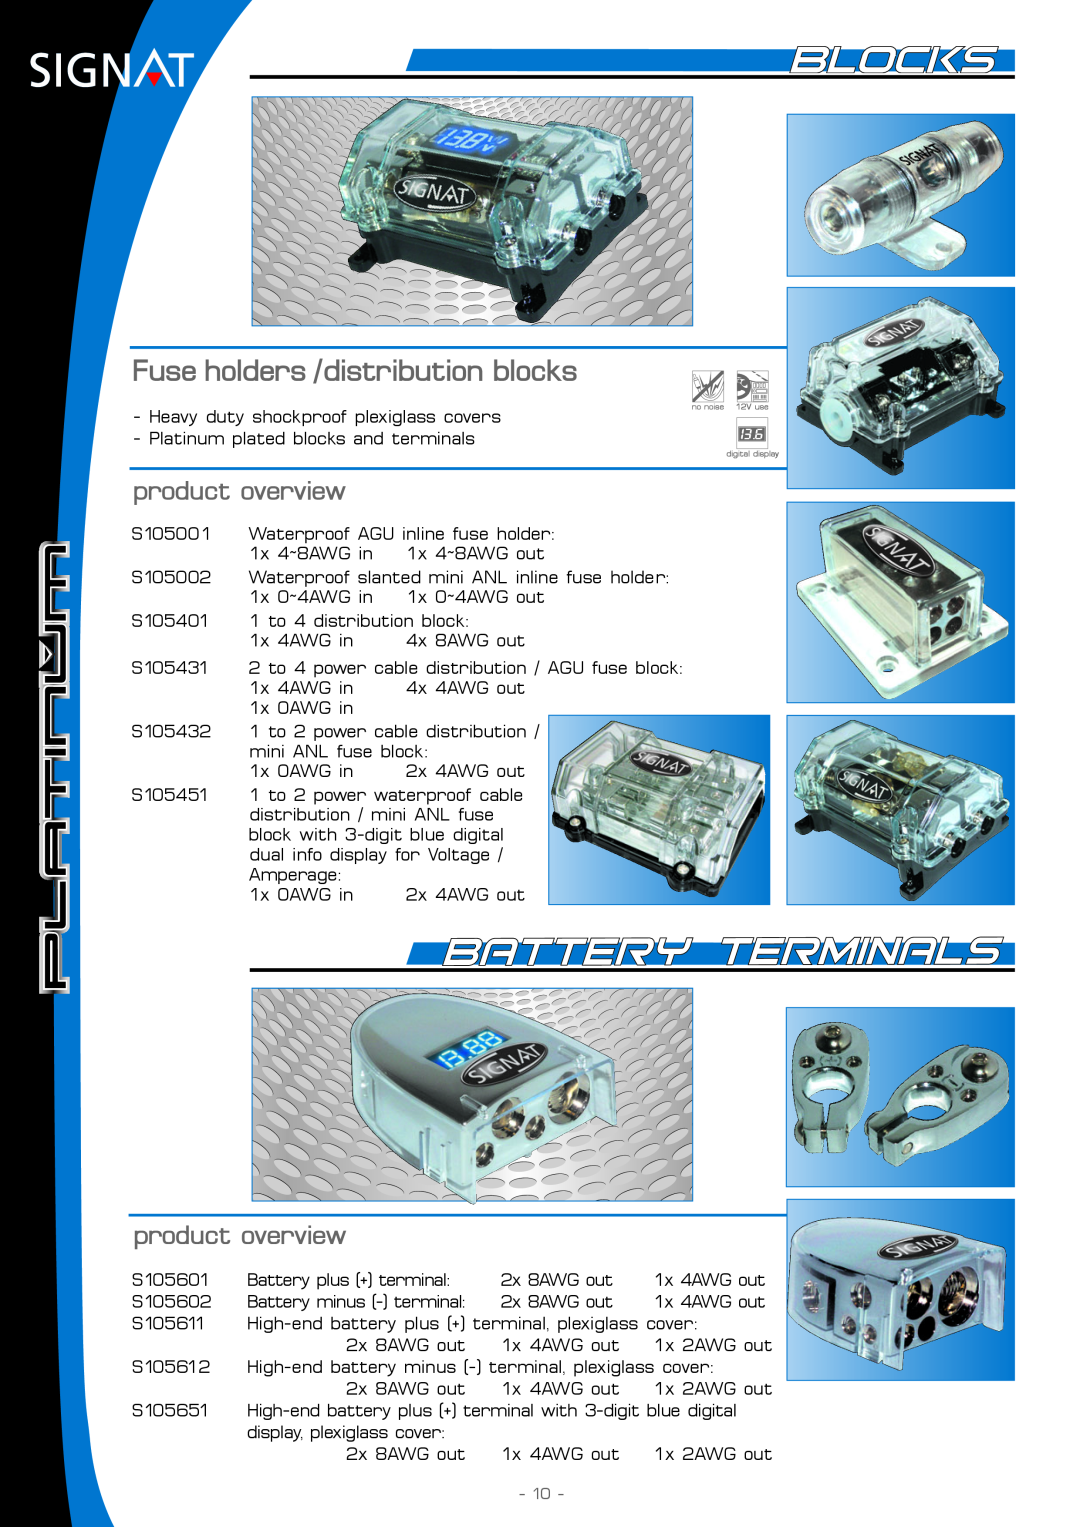 Signat S104001, S104201 manual Fuse holders /distribution blocks, product overview, Heavy duty shockproof plexiglass covers 